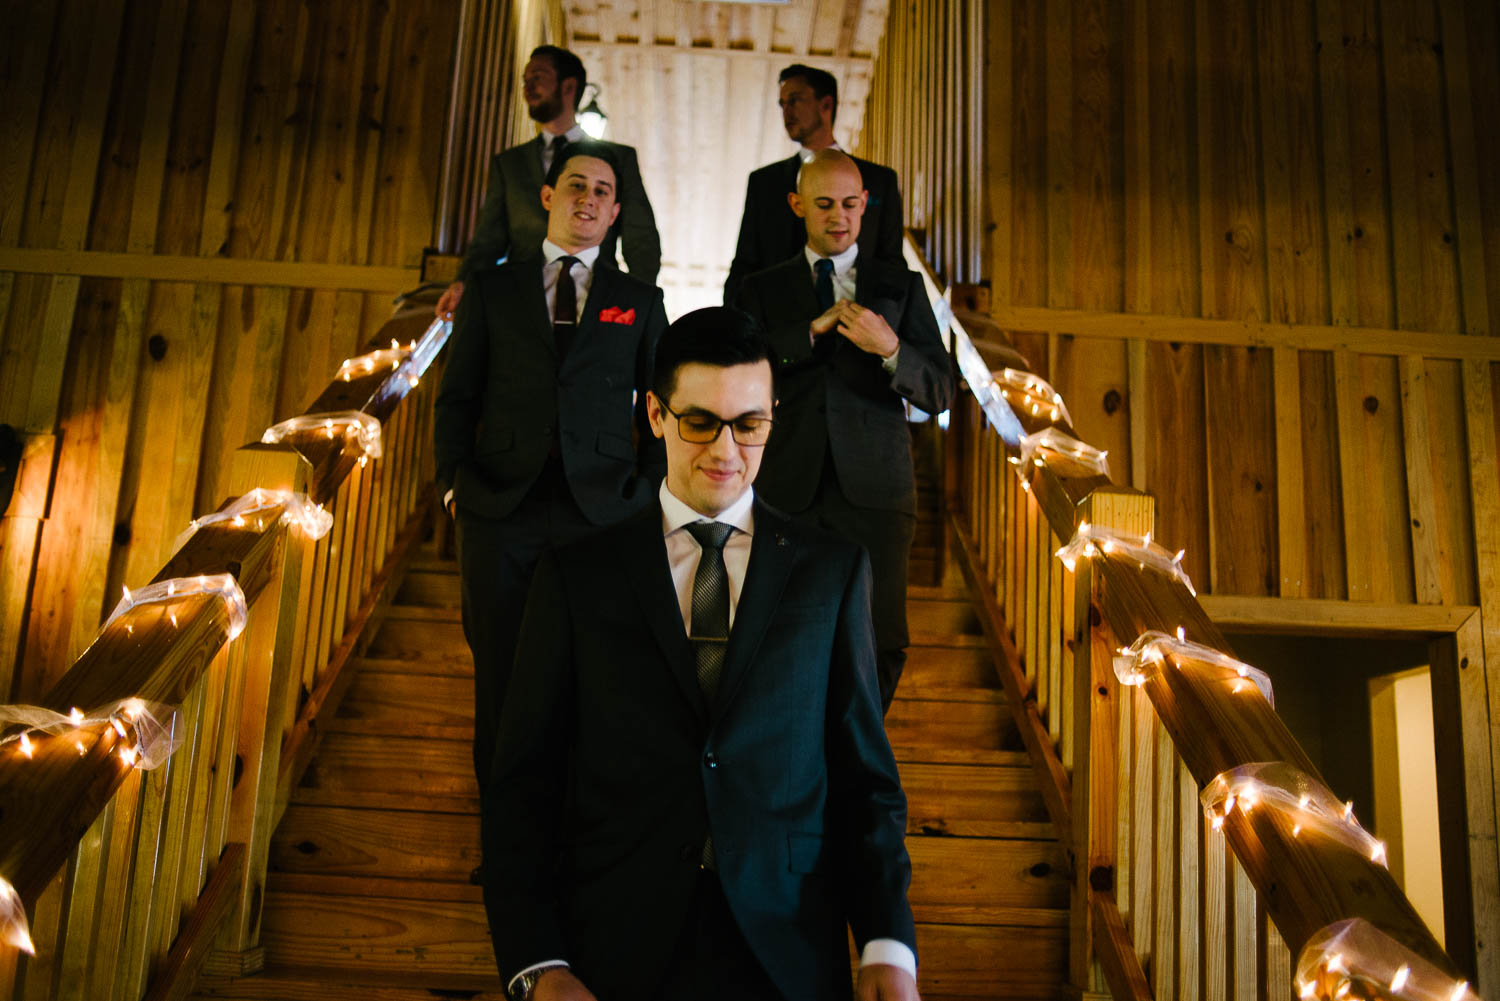 Groom and groomsmen walk down stairs amd commence walk to ceremony Pecan Springs Houston Texas photo by Philip Thomas Photography